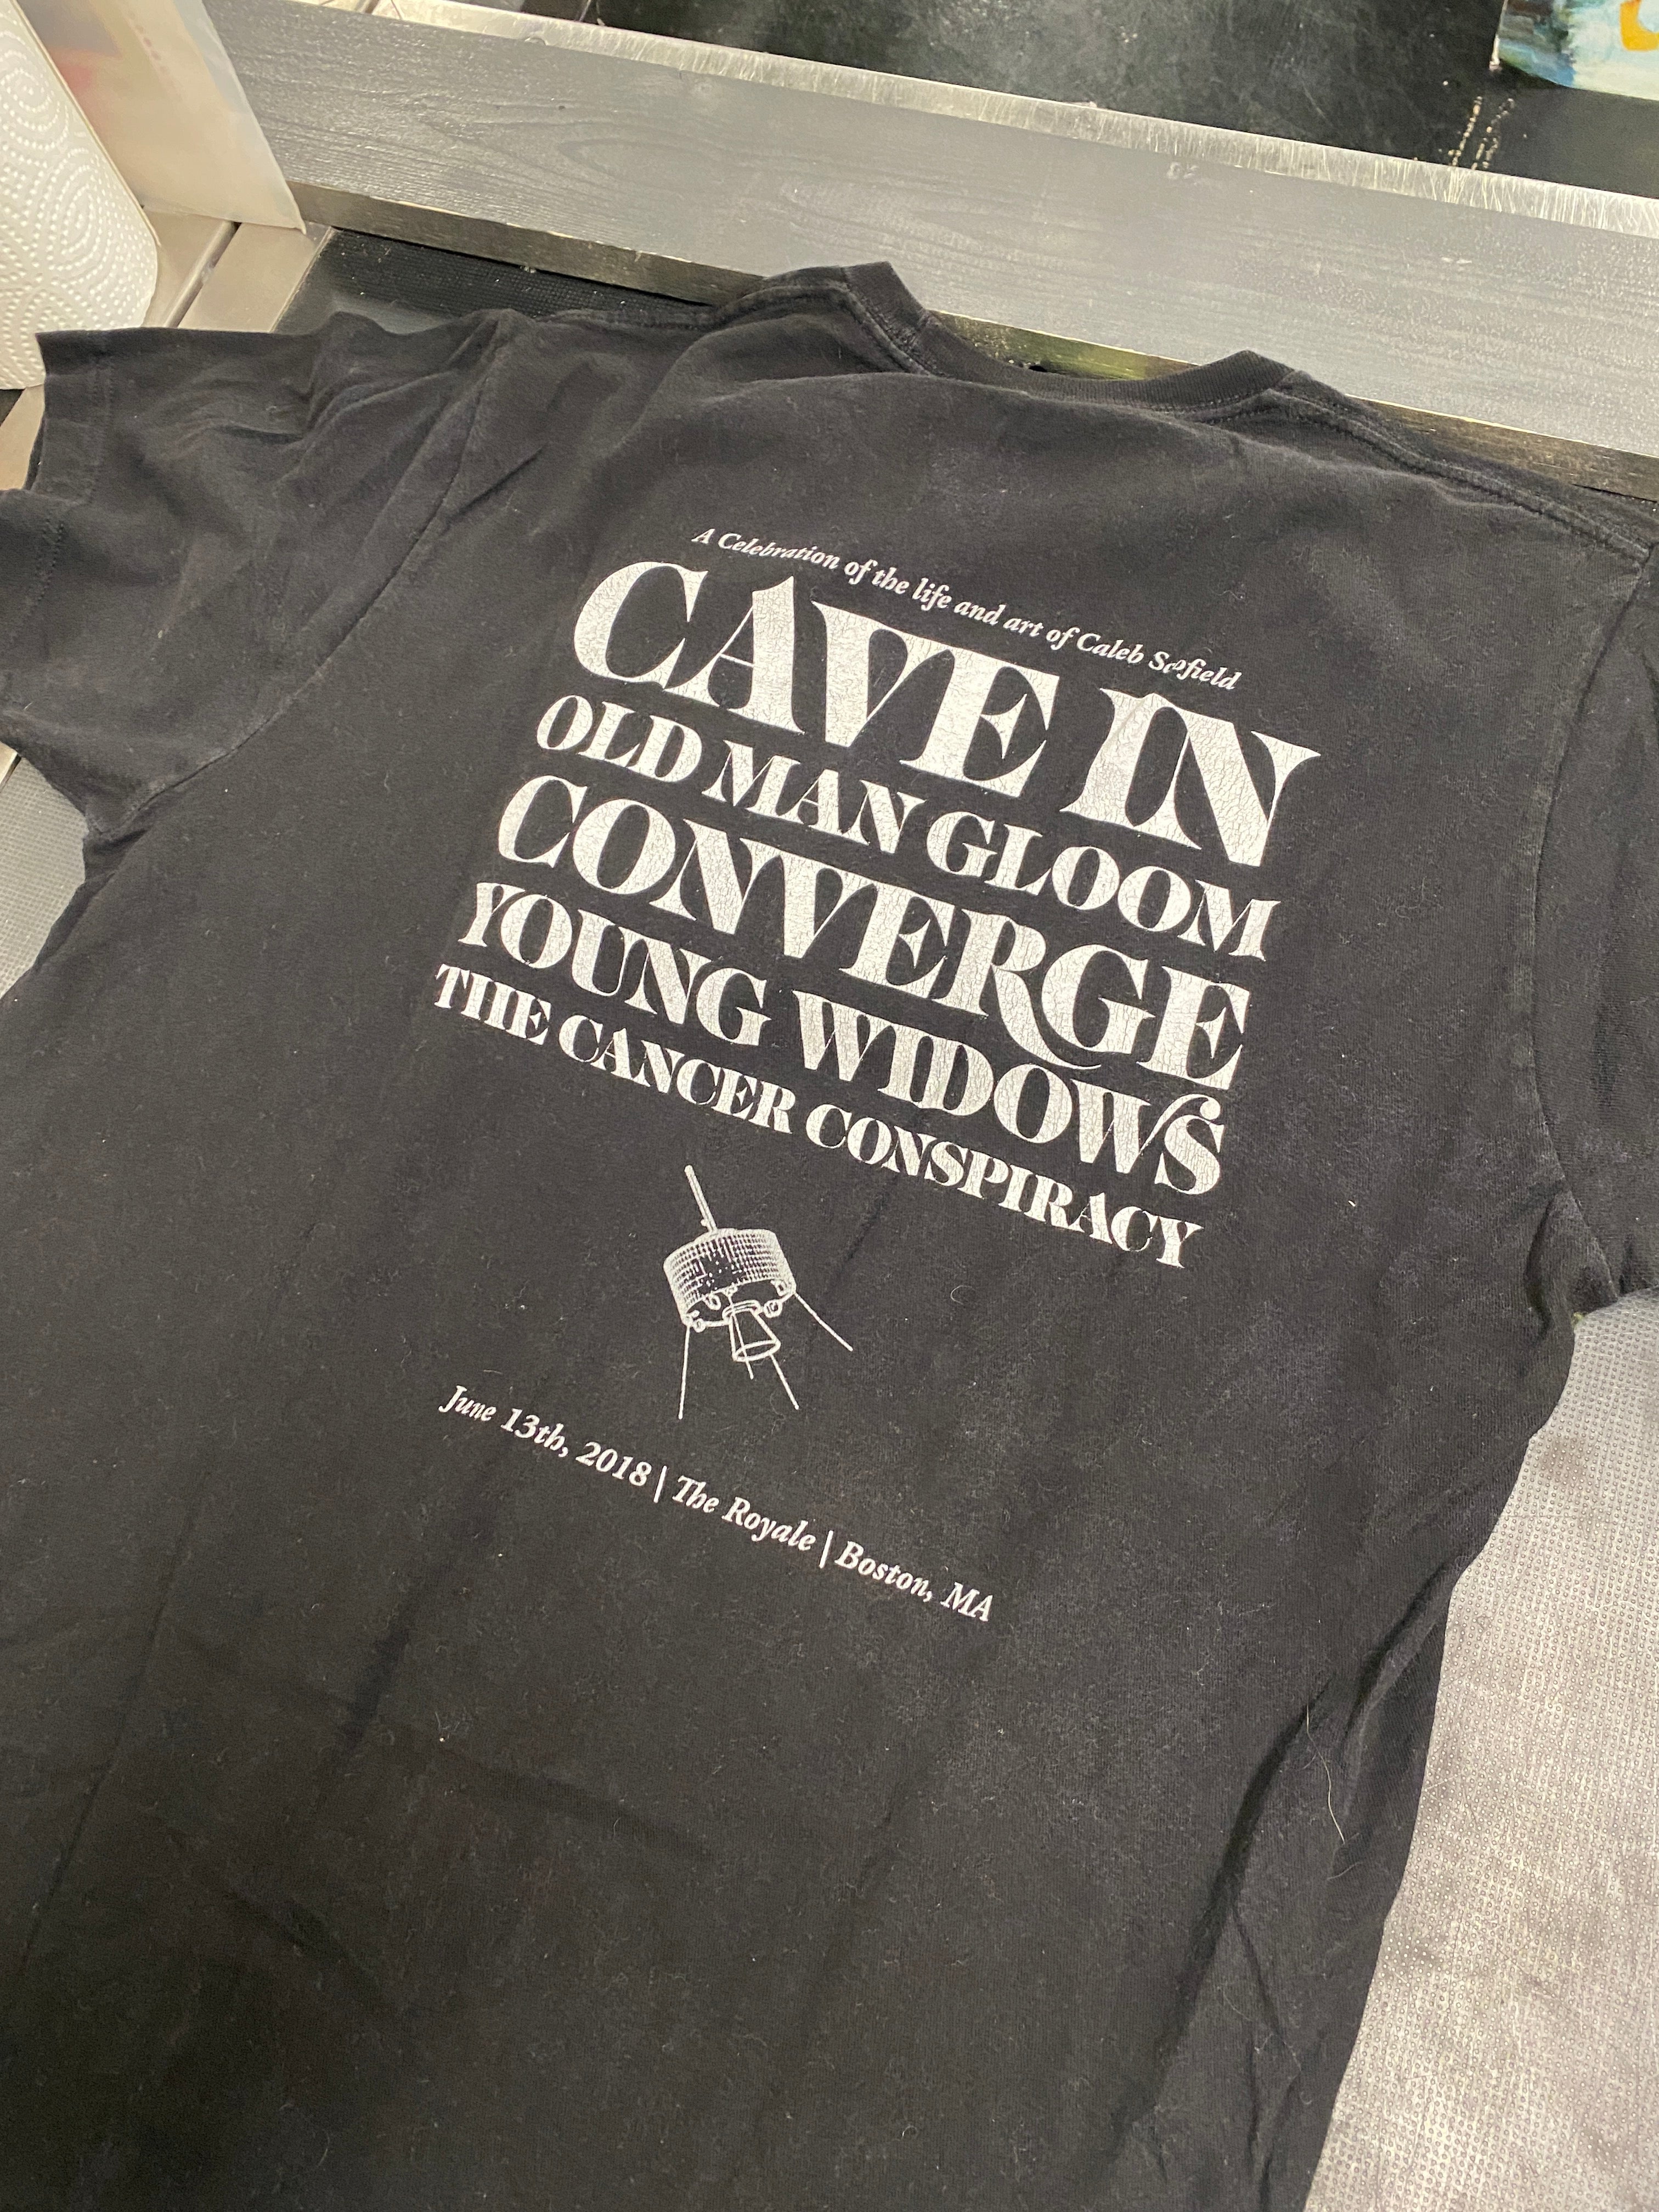 Caleb Scofield Memorial Event T-Shirt, Blk, M (Fts Cave In, Old Man Gloom, Converge +More) - Darkside Records